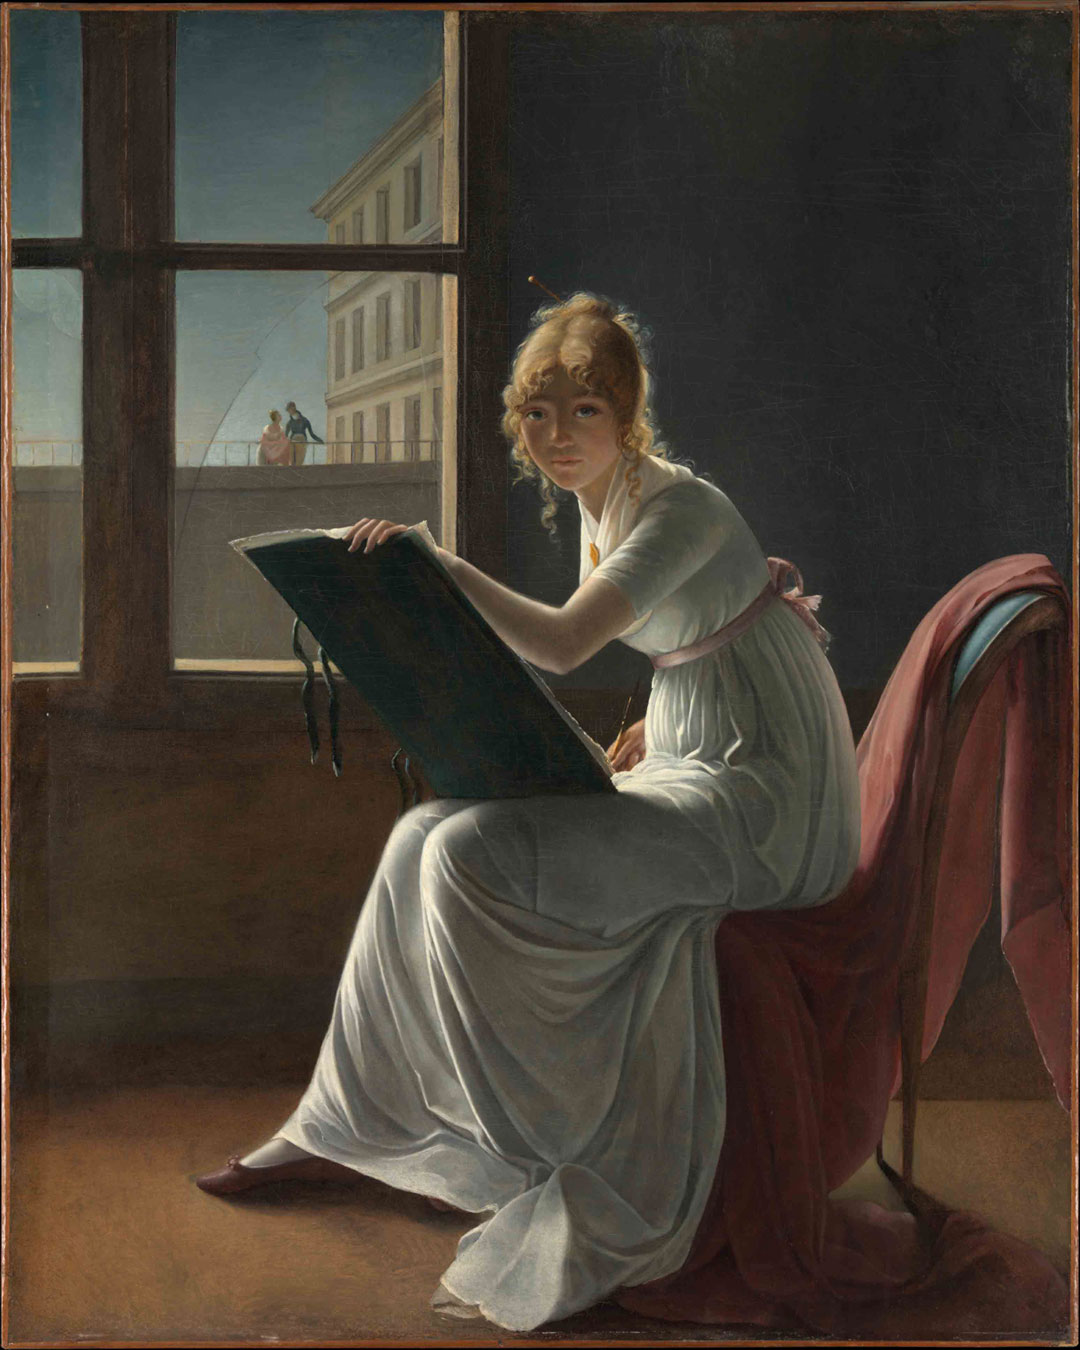 Marie Joséphine Charlotte du Val d'Ognes (1801) by Marie-Denise Villers. All images from Great Women Artists